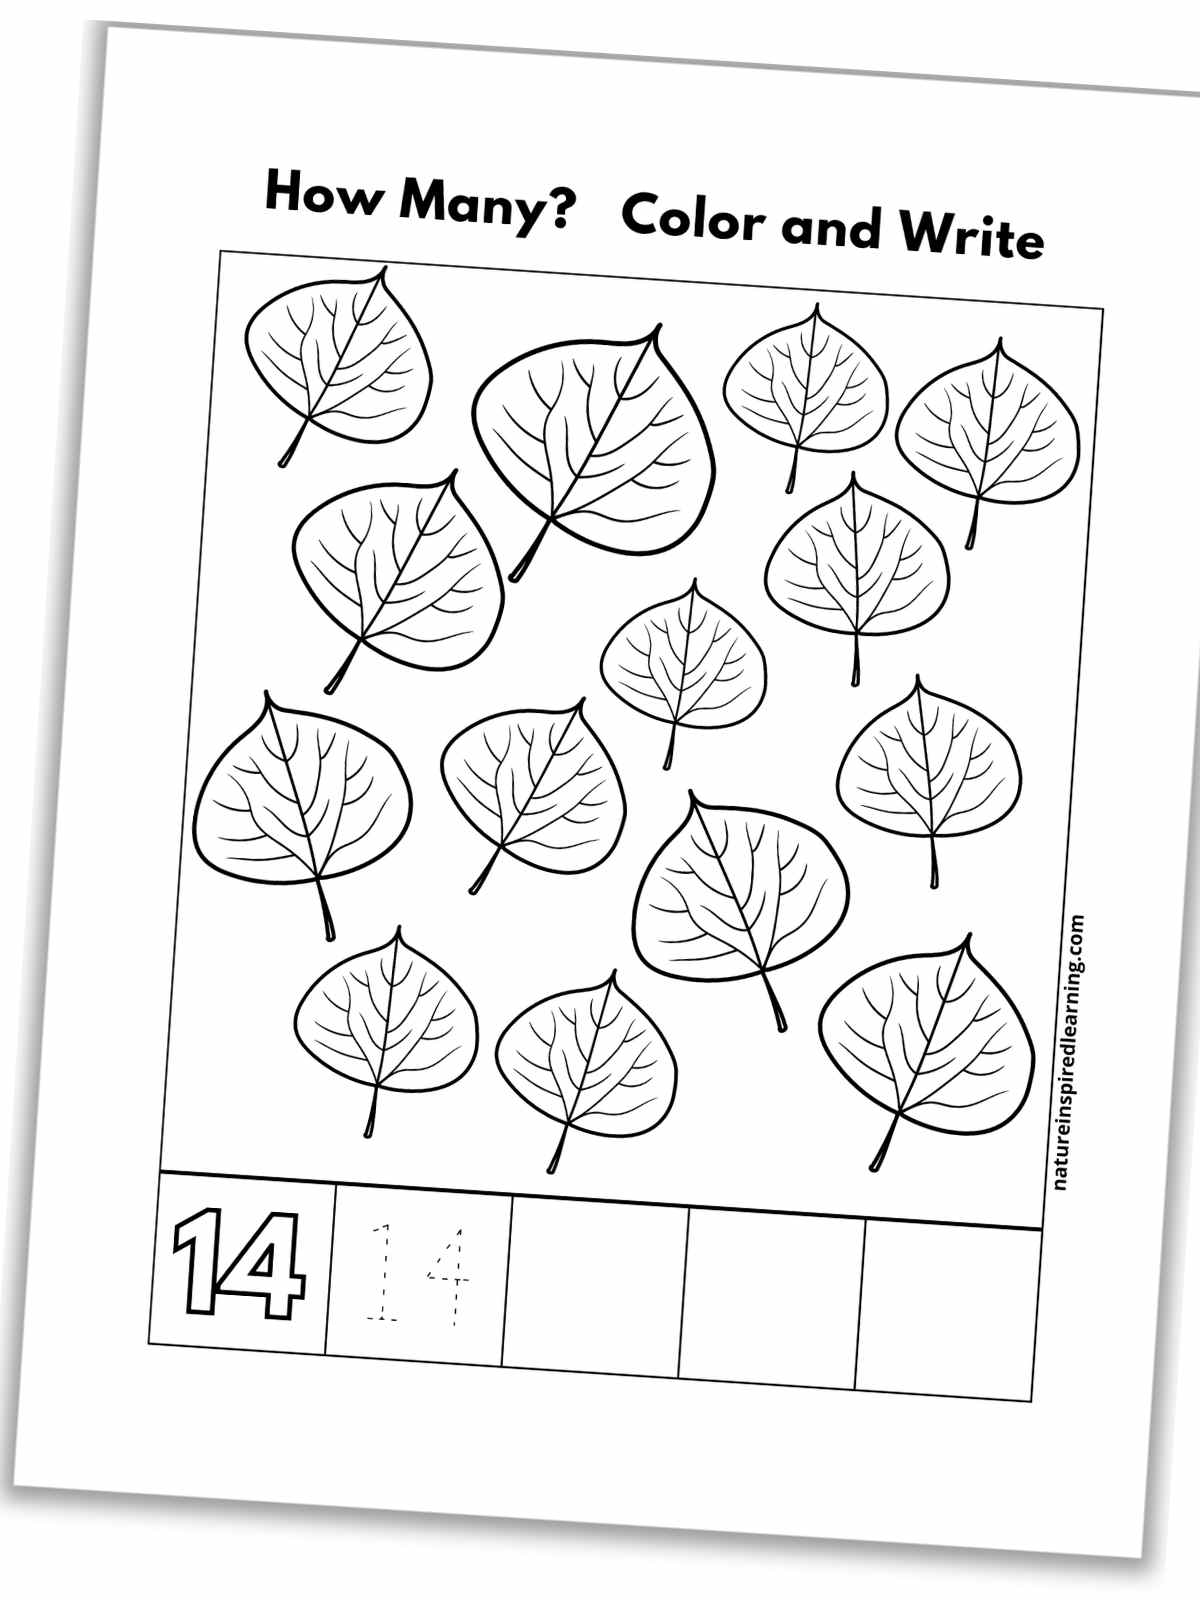 black and white number fourteen worksheet with leaves, outline of number 14, a traceable 14, and blank boxes slanted with a drop shadow